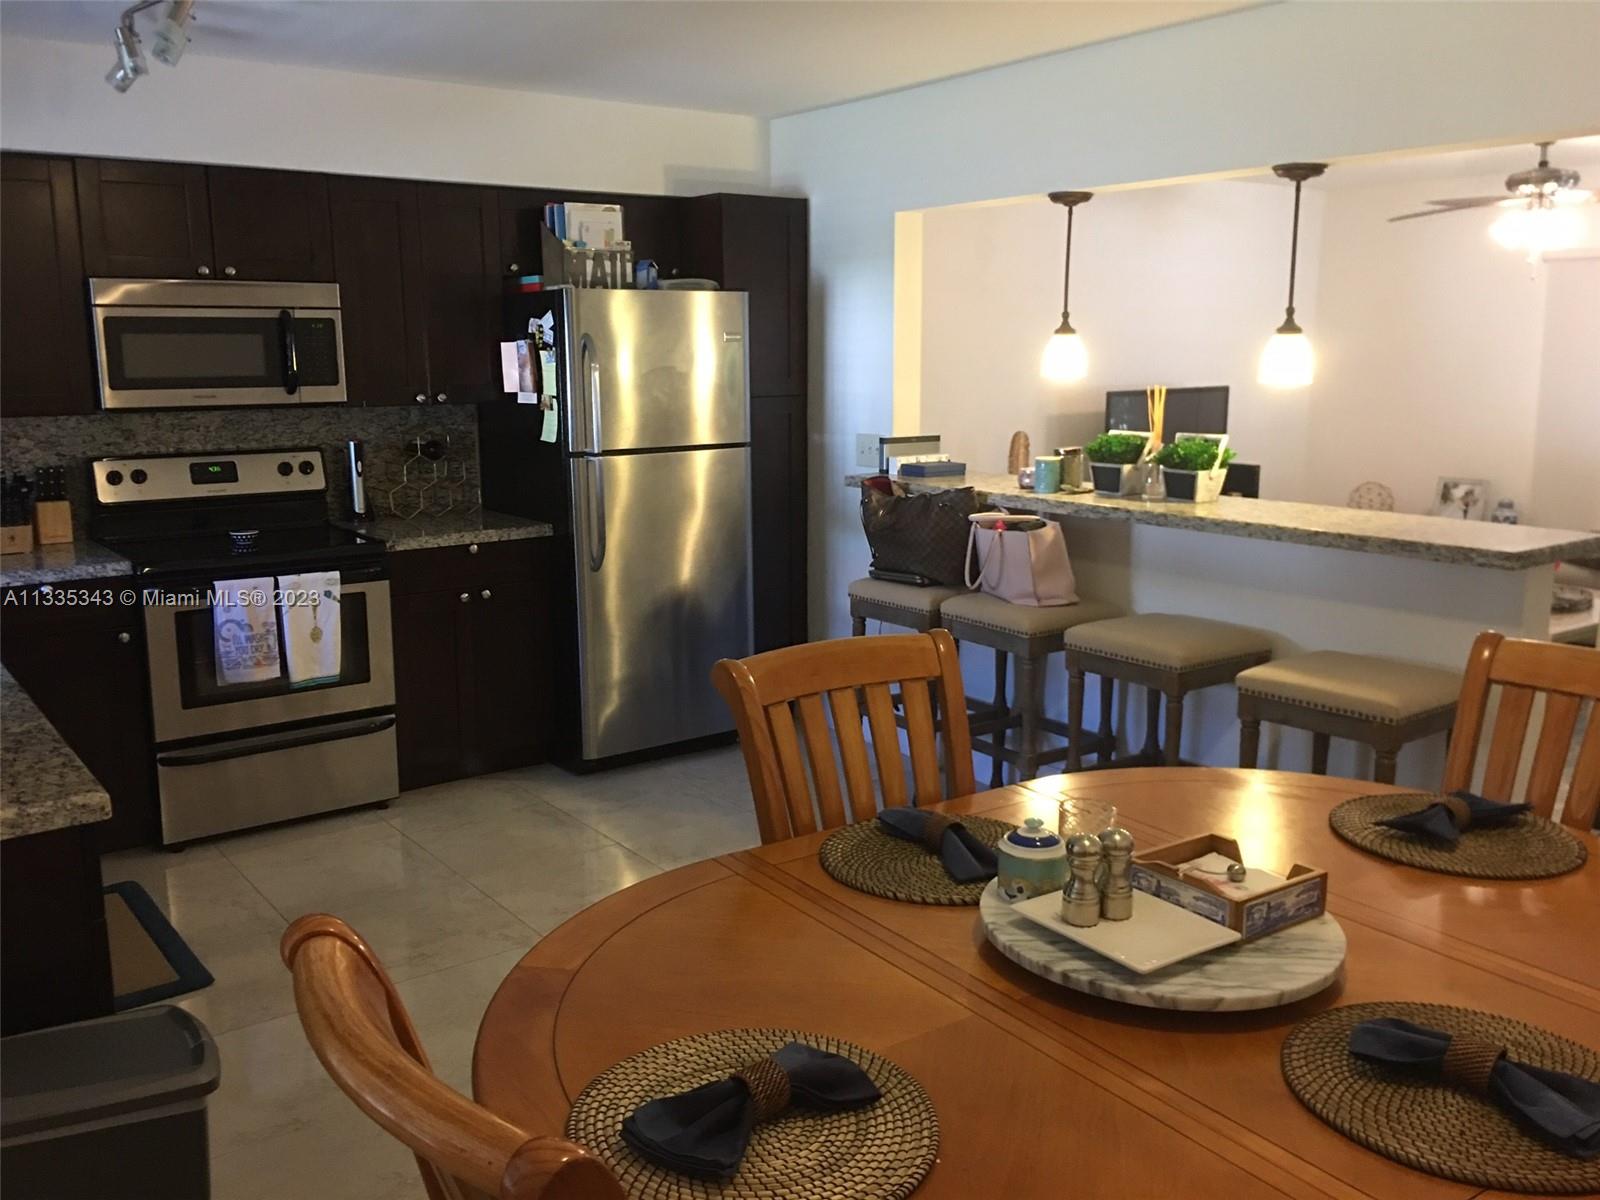 GORGEOUS 2/2 DUPLEX WALKING DISTANCE TO THE NEW LOWES HOTEL IN THE HEART OF CORAL GABLES.  FIRST TIME BEING RENTED WITH OPTION OF FULLY OR PARTIALLY FURNISHED.  GREAT LOCATION AND OPEN SPACES WITH REMODELED KITCHEN AND OWN LAUNDRY ROOM WITH FULL SIZE WASHER AND DRYER.  PLEASE GIVE 24 HOUR NOTICE TO SHOW.  TEXT AGENT DIRECTLY.  AVAILABLE STARTING MARCH 1ST, 2023.  SHORT TERM OK- PRICE AND COMMISSION MAY VARY.  THANK YOU.